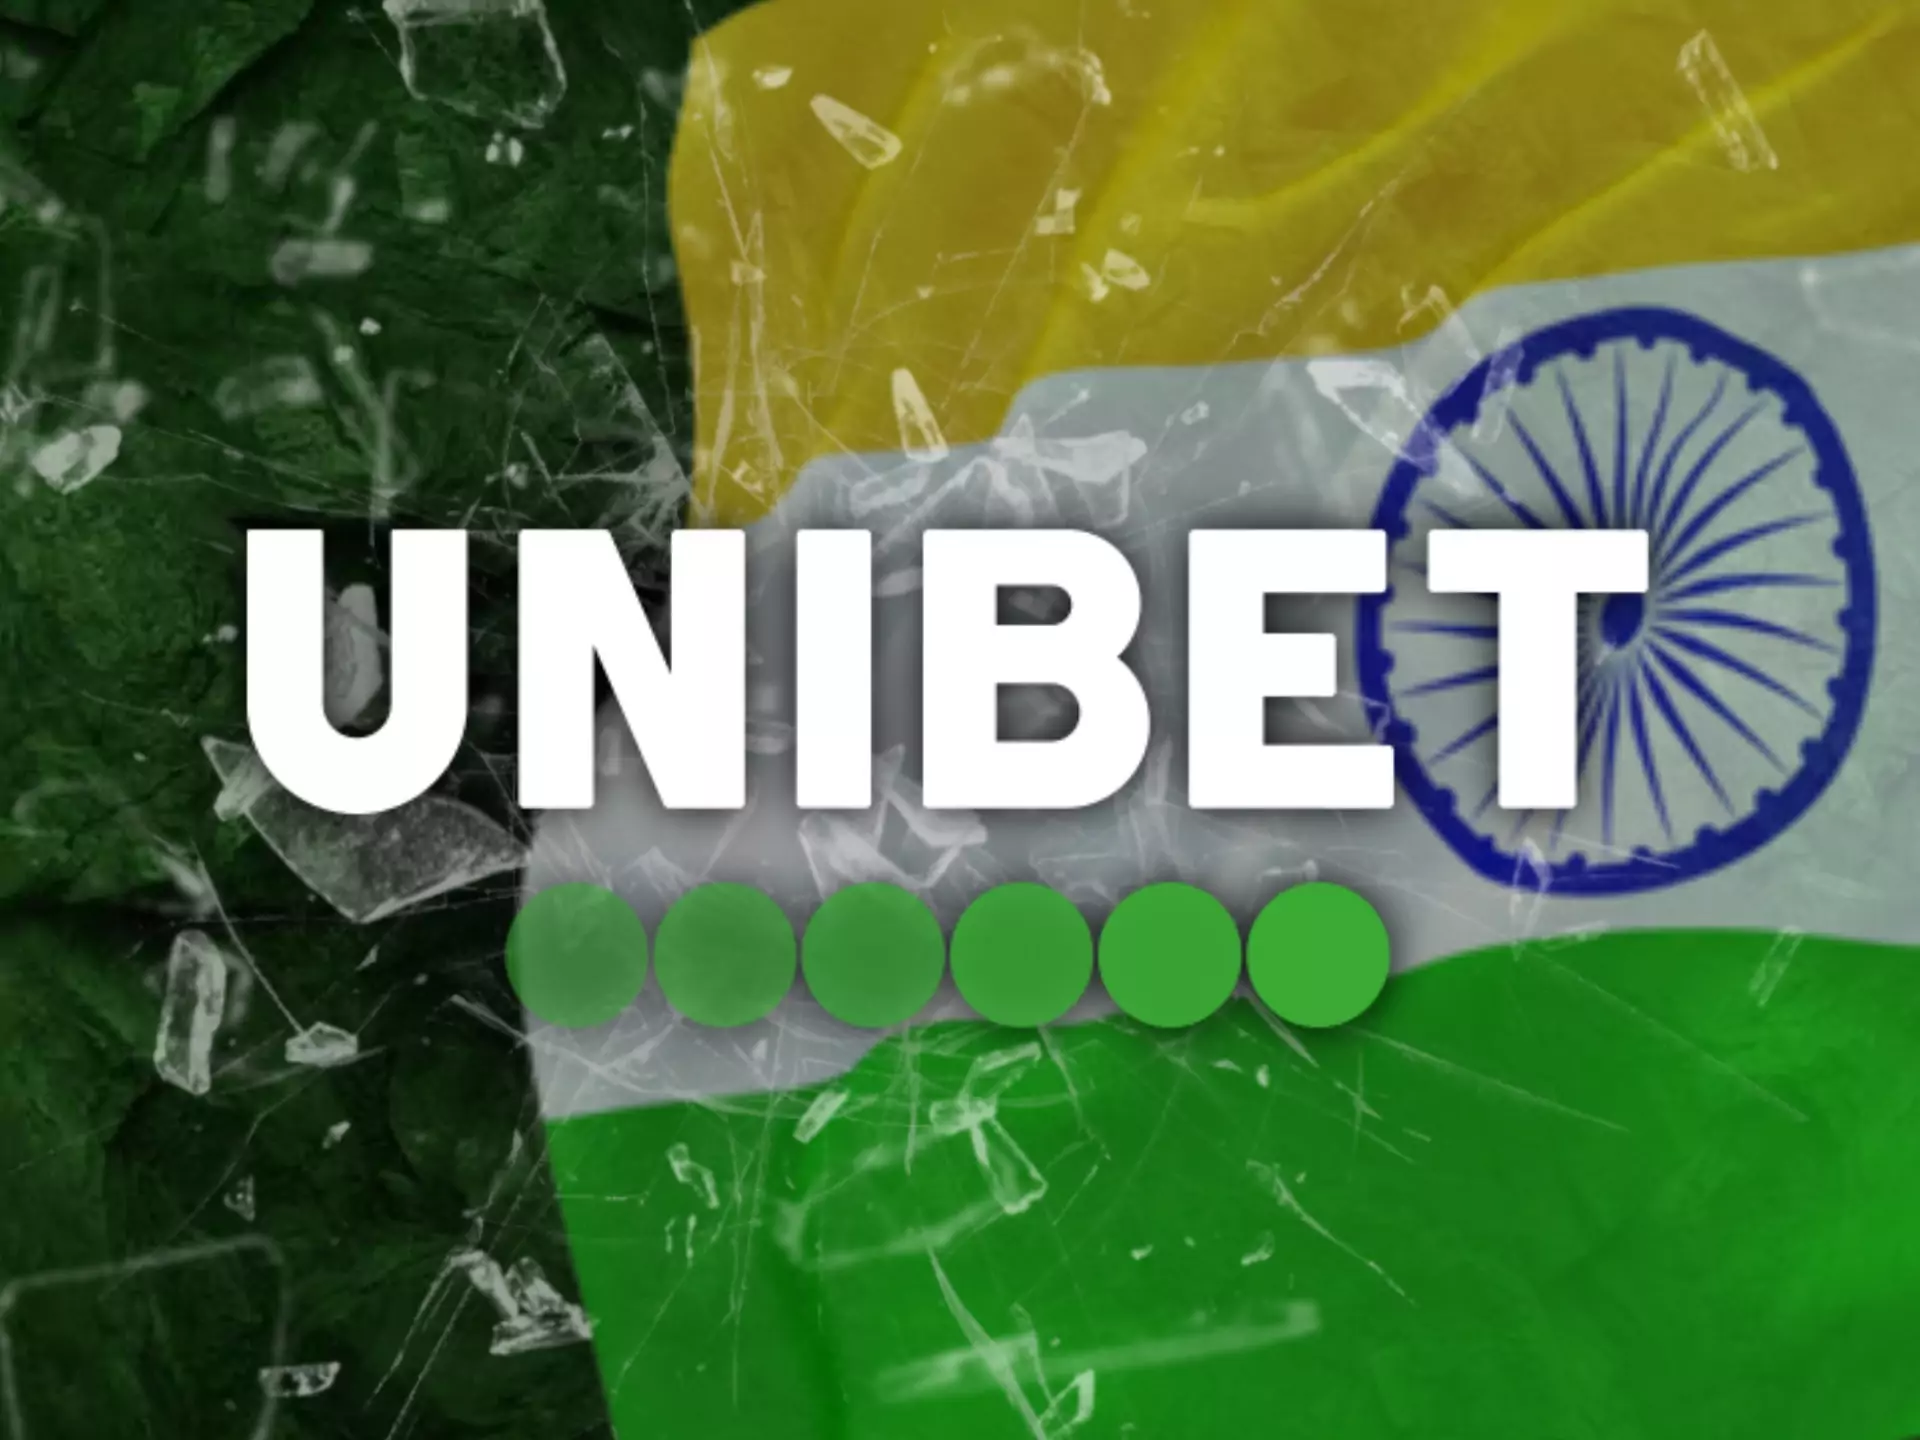 Unibet is legal for betting from India.